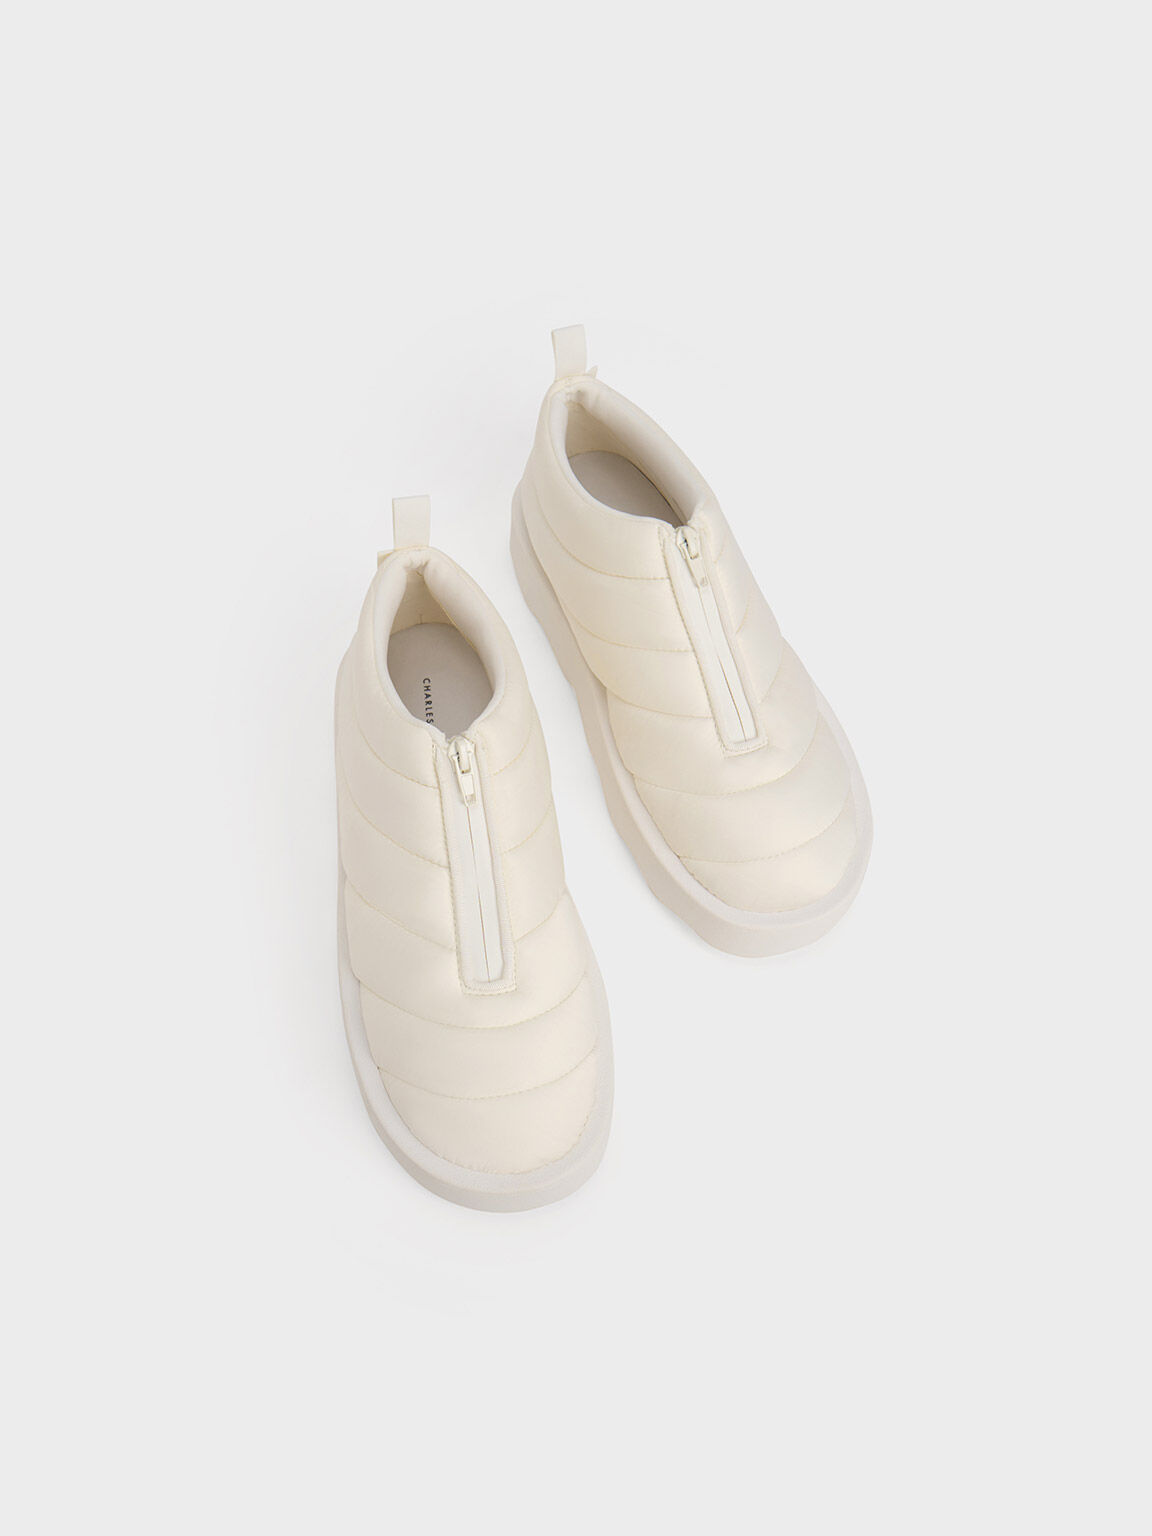 Puffy Nylon Panelled Zip-Up Boots, White, hi-res